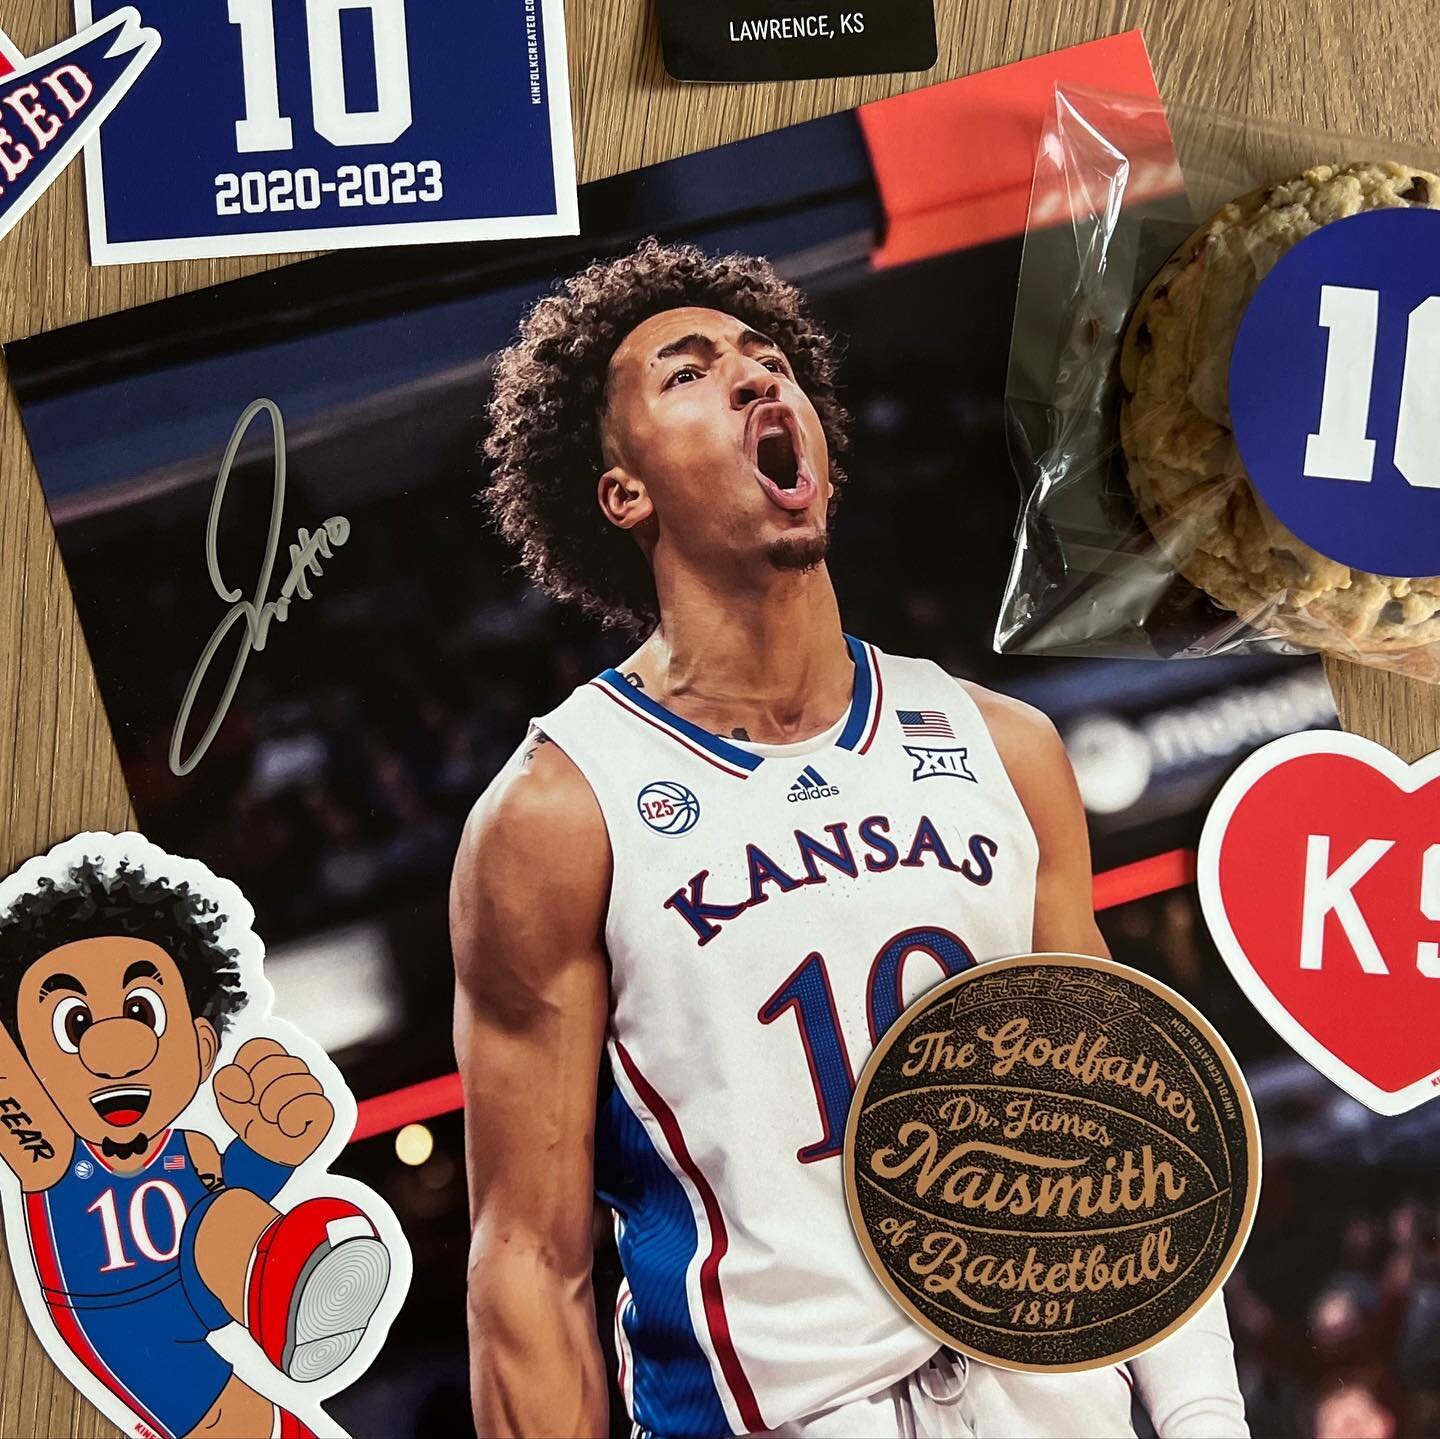 THE CHAMP! 🏀 #rockchalk
&mdash;
Jazzed to be a small part of this special day for @thejalenwilson over at the @thenaismithhouse in Lawrence!
&mdash;
THANK YOU to @ccscookiecompany for being a community LEADER and taking care of ALL the PEOPLE! ❤️
&m